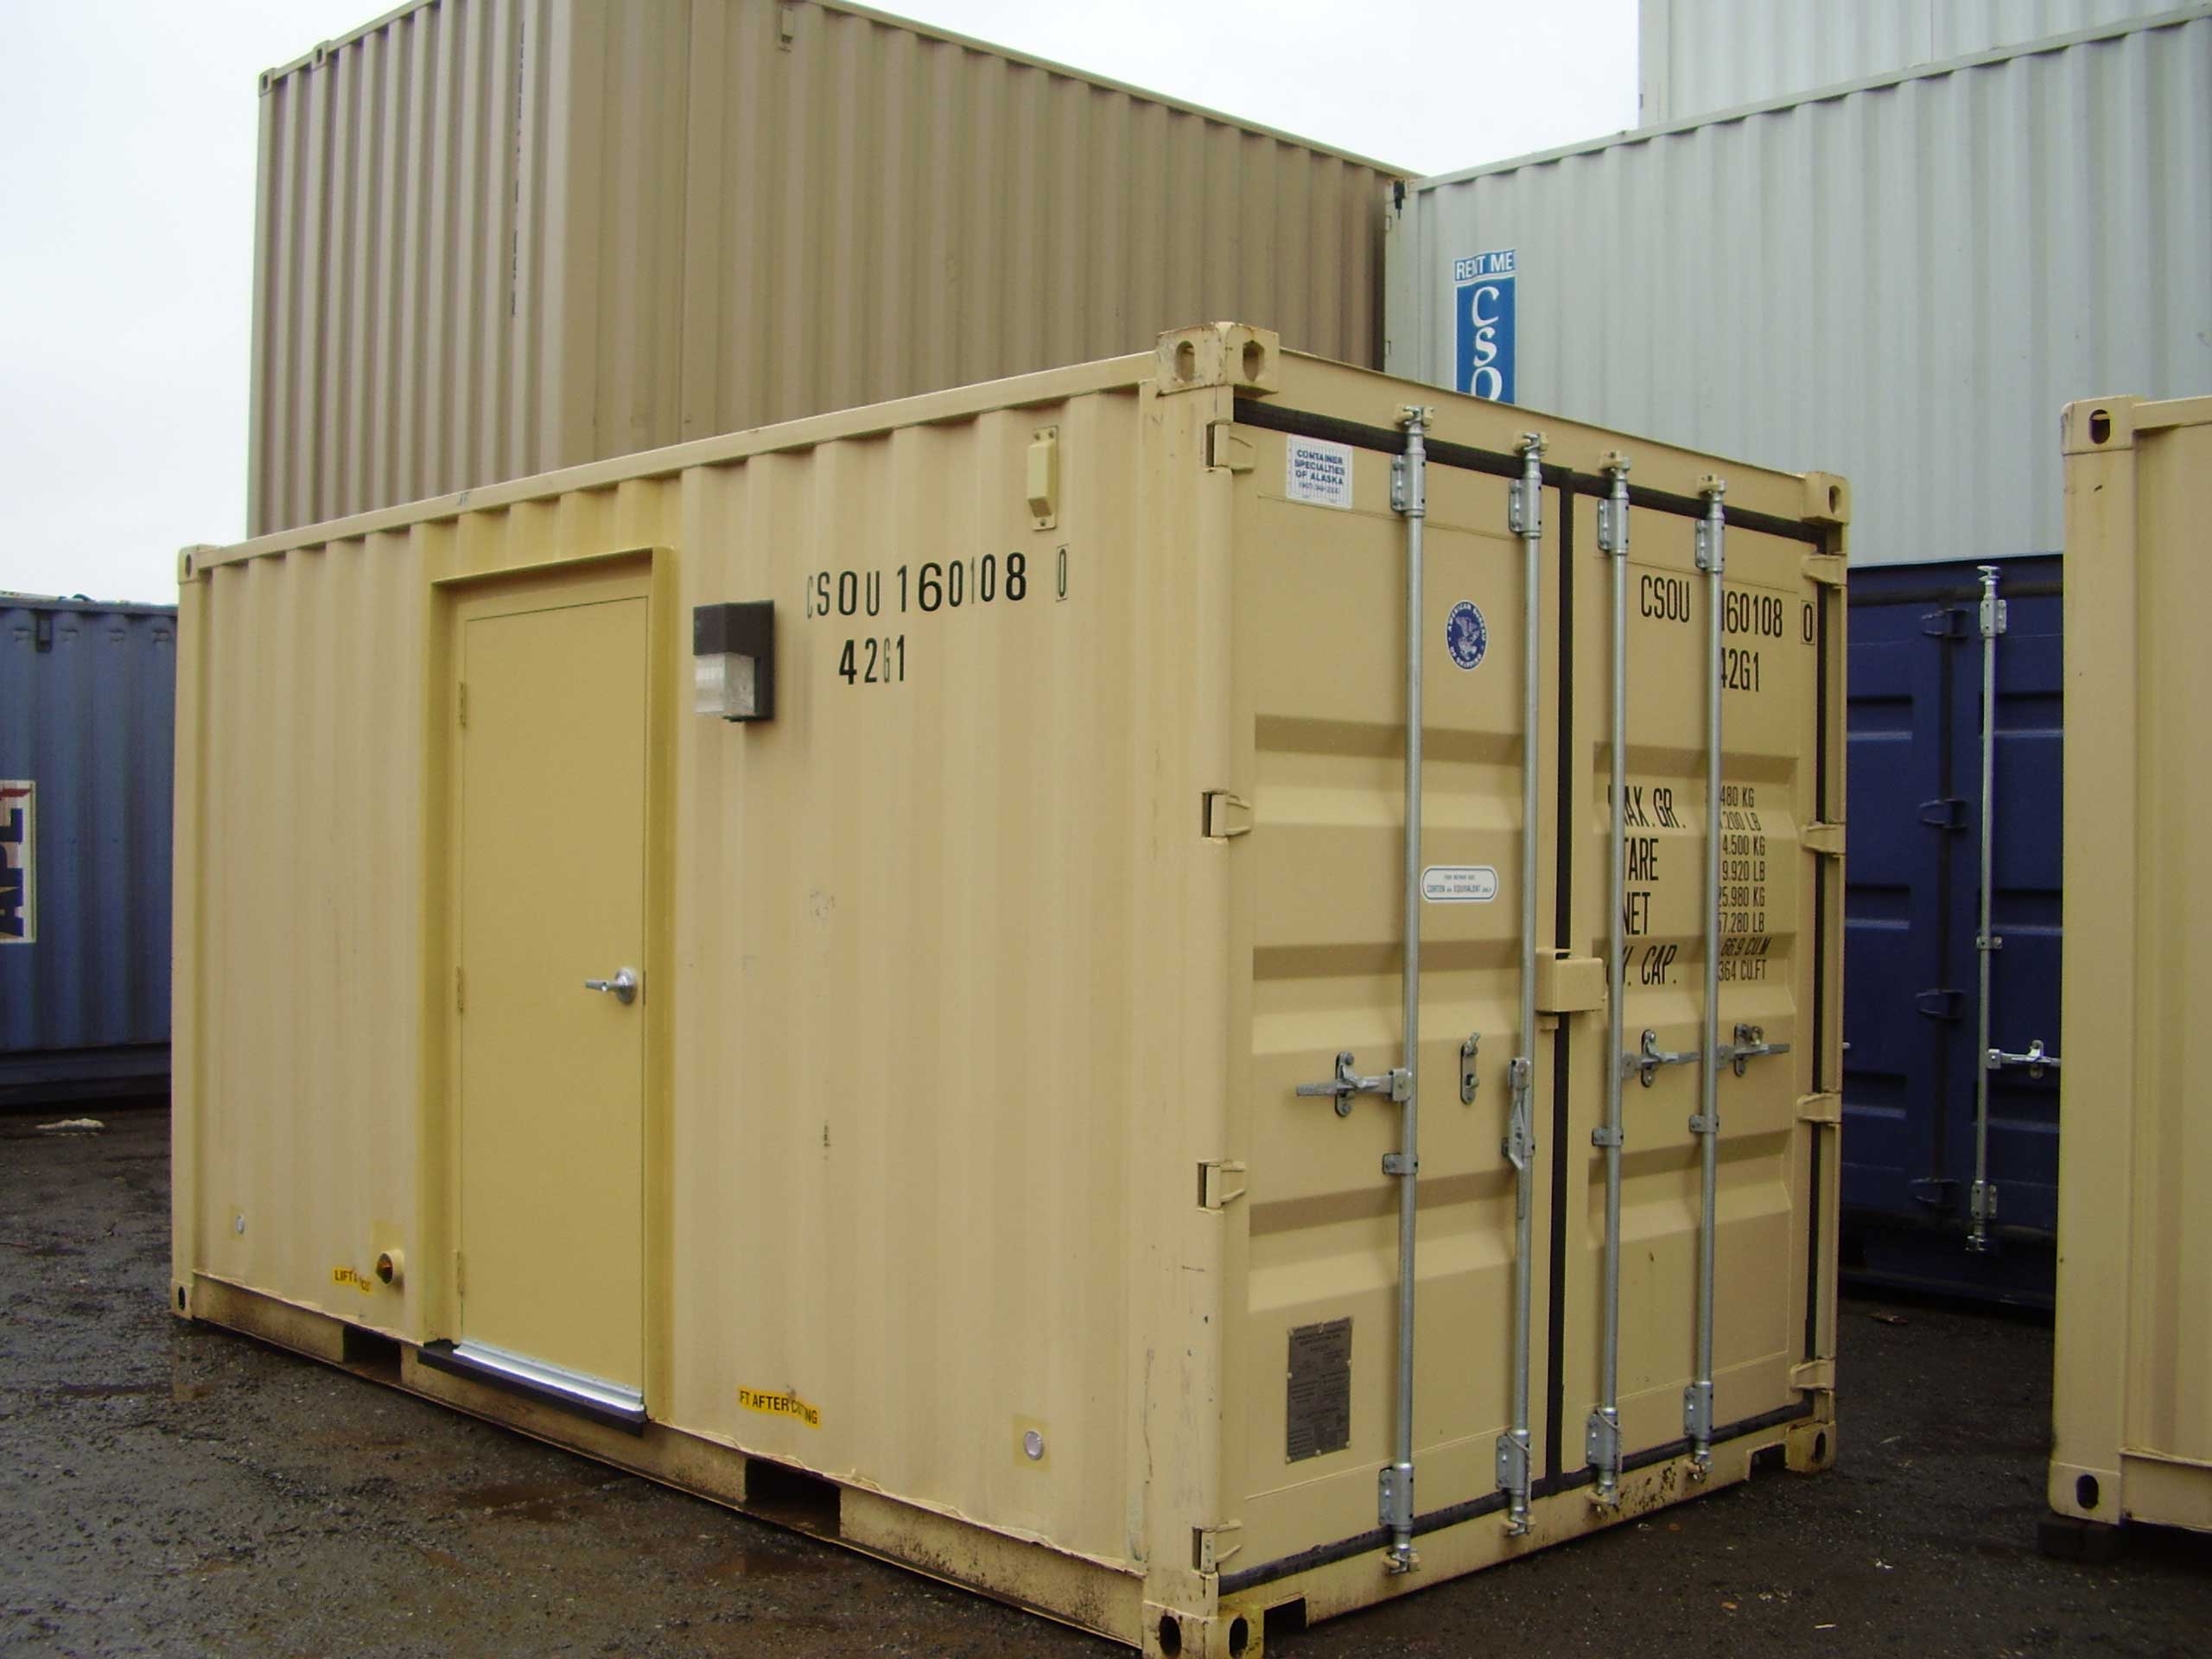 Off/onsite battery power container conversion project.  Provide battery power at remote locations using a container converted to a backup power source, such as this battery power container created for Pogo Mine.